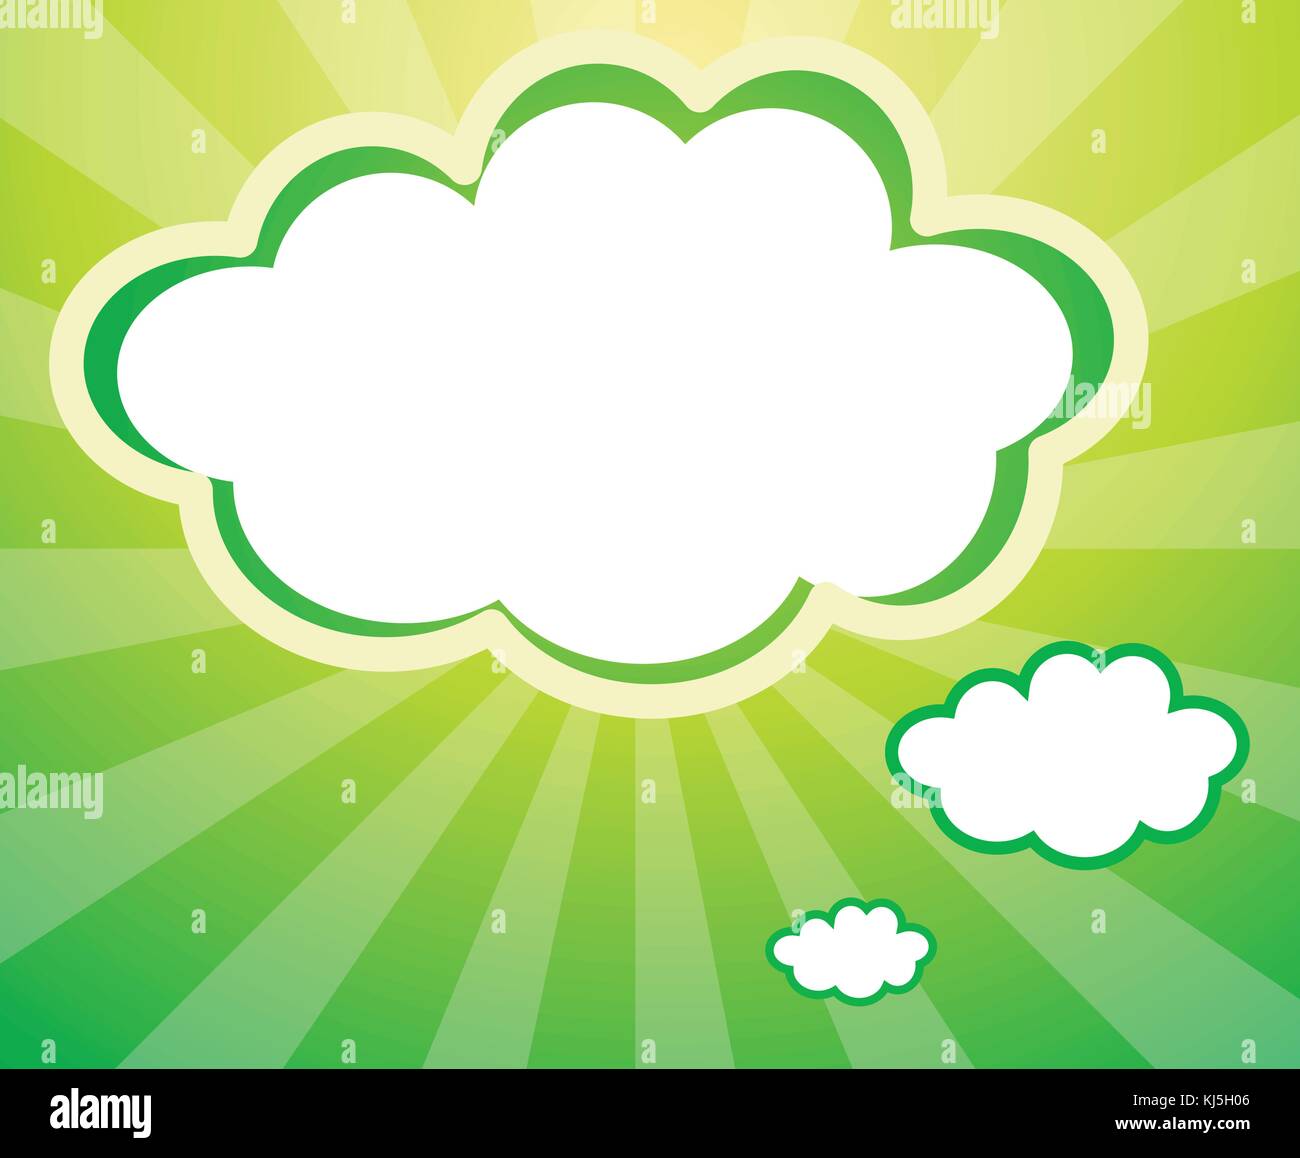 Illustration of an empty template in a cloud form Stock Vector